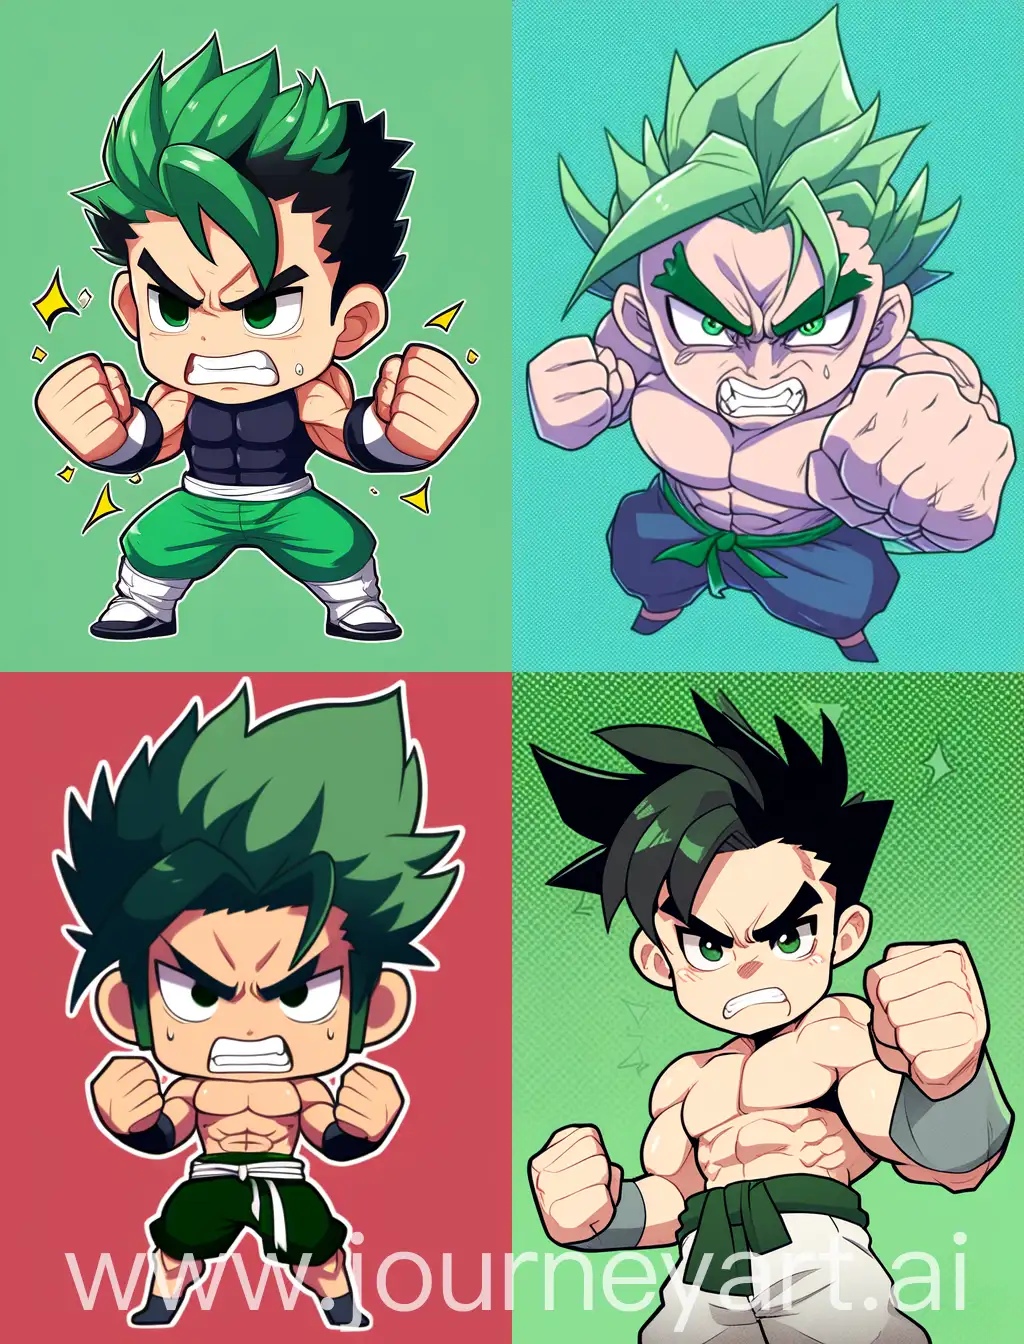 angry chibi anime guy showing muscles, cartoon anime style, with strong lines, with green solid background